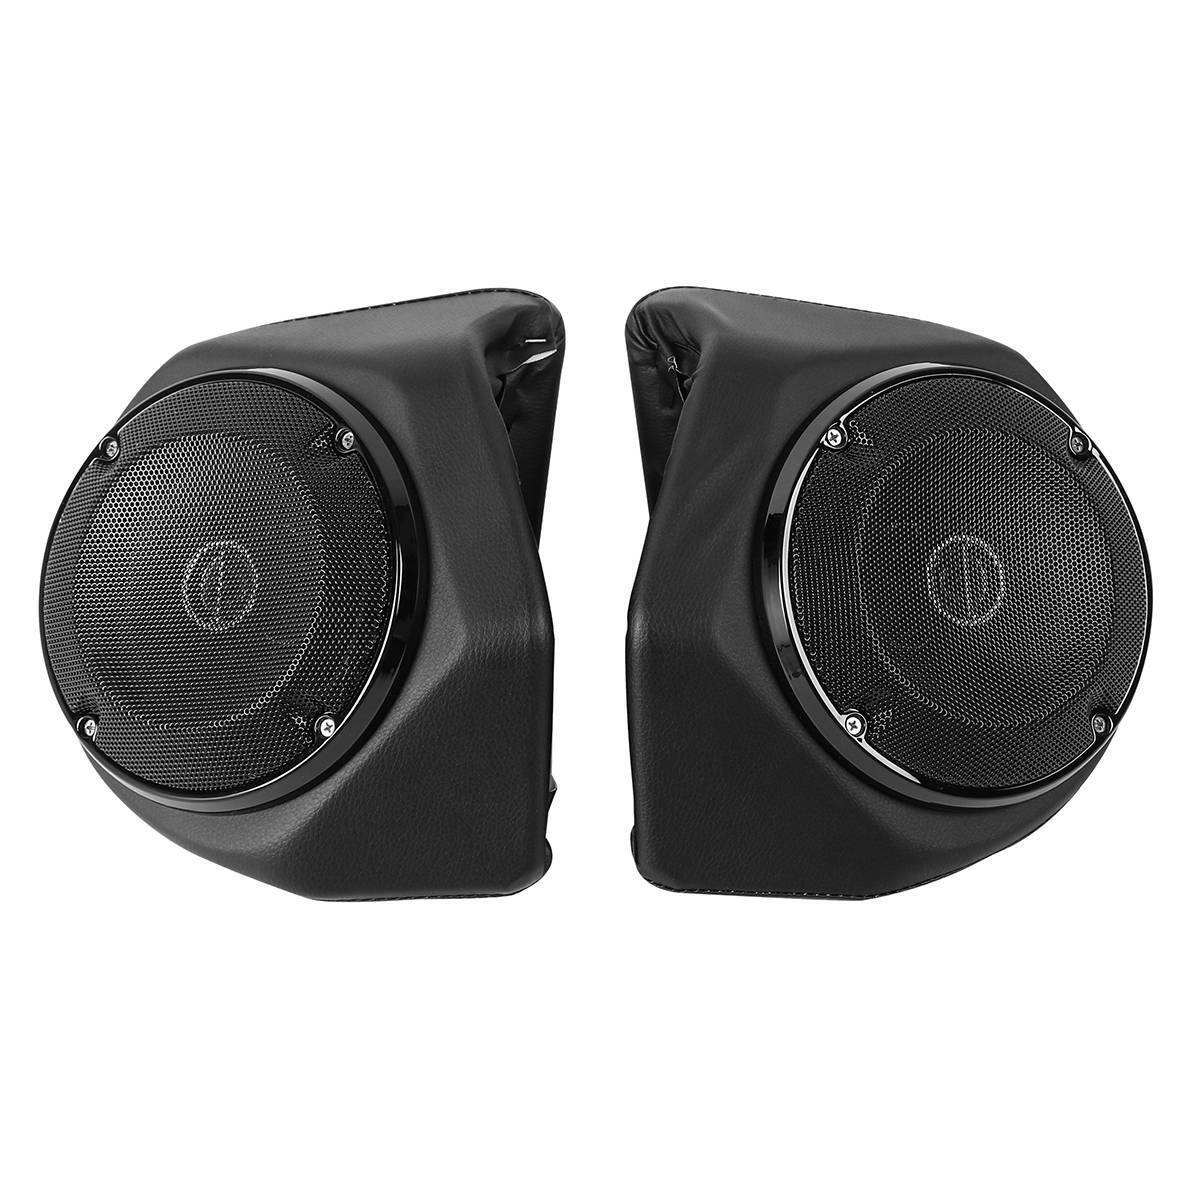 Black King Trunk 6.5'' Rear Speakers Pods 【67%OFF!】 即発送可能 For Pak Harley Tour Touring Fit 14-21